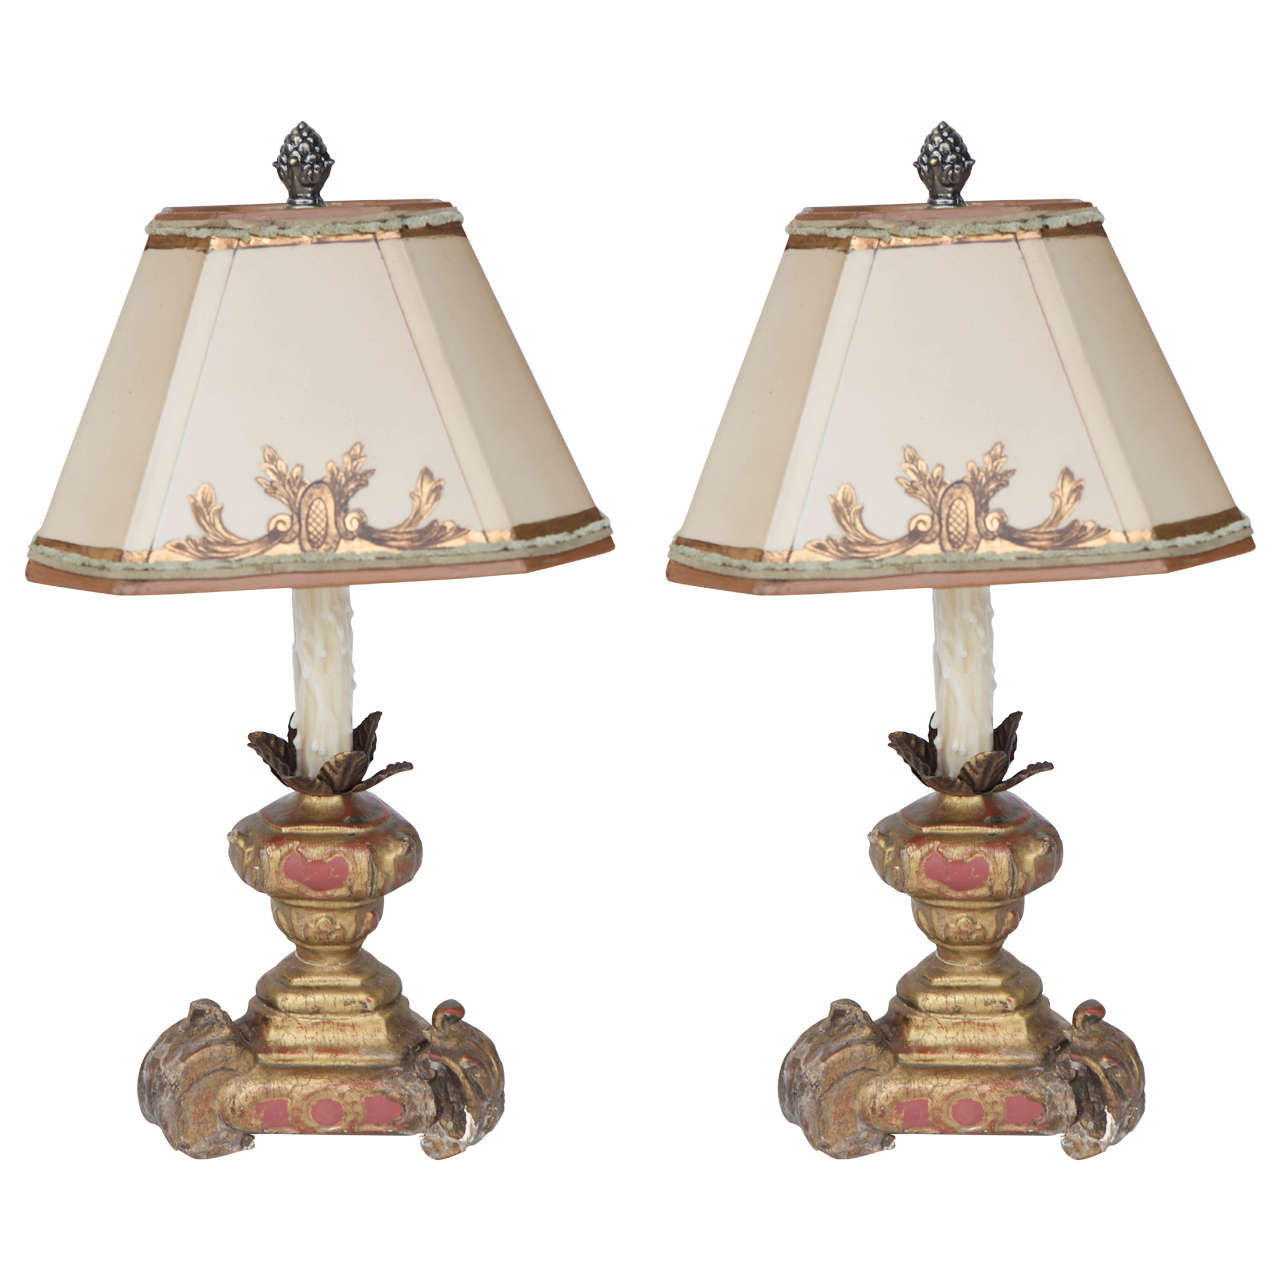 Pair of 19th Century Italian Giltwood and Painted Candle Lamps For Sale